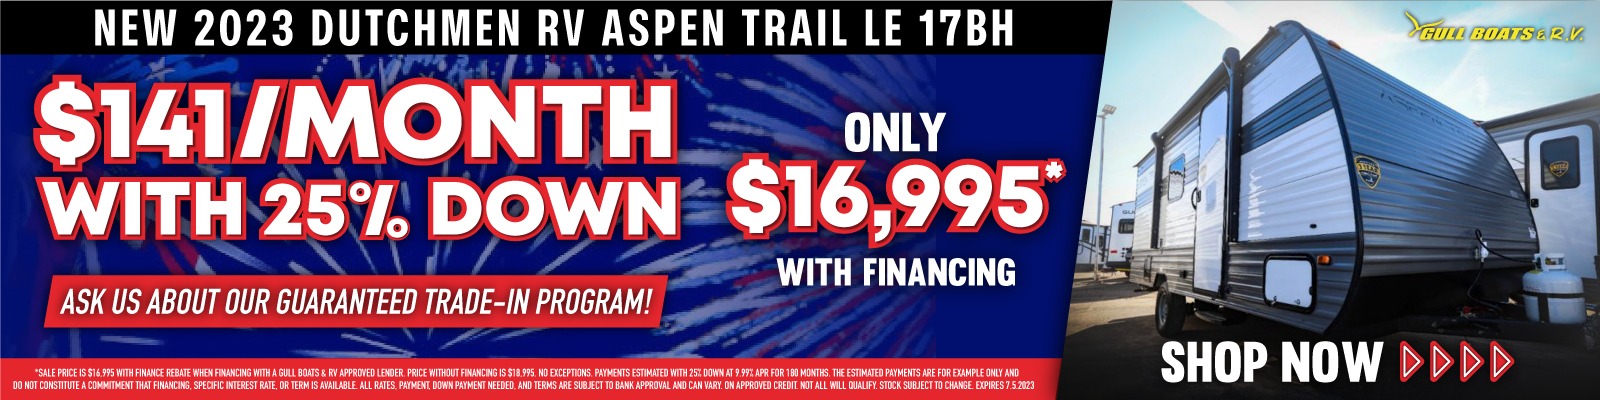 Aspen Trail LE 17BH starting at $16,995*